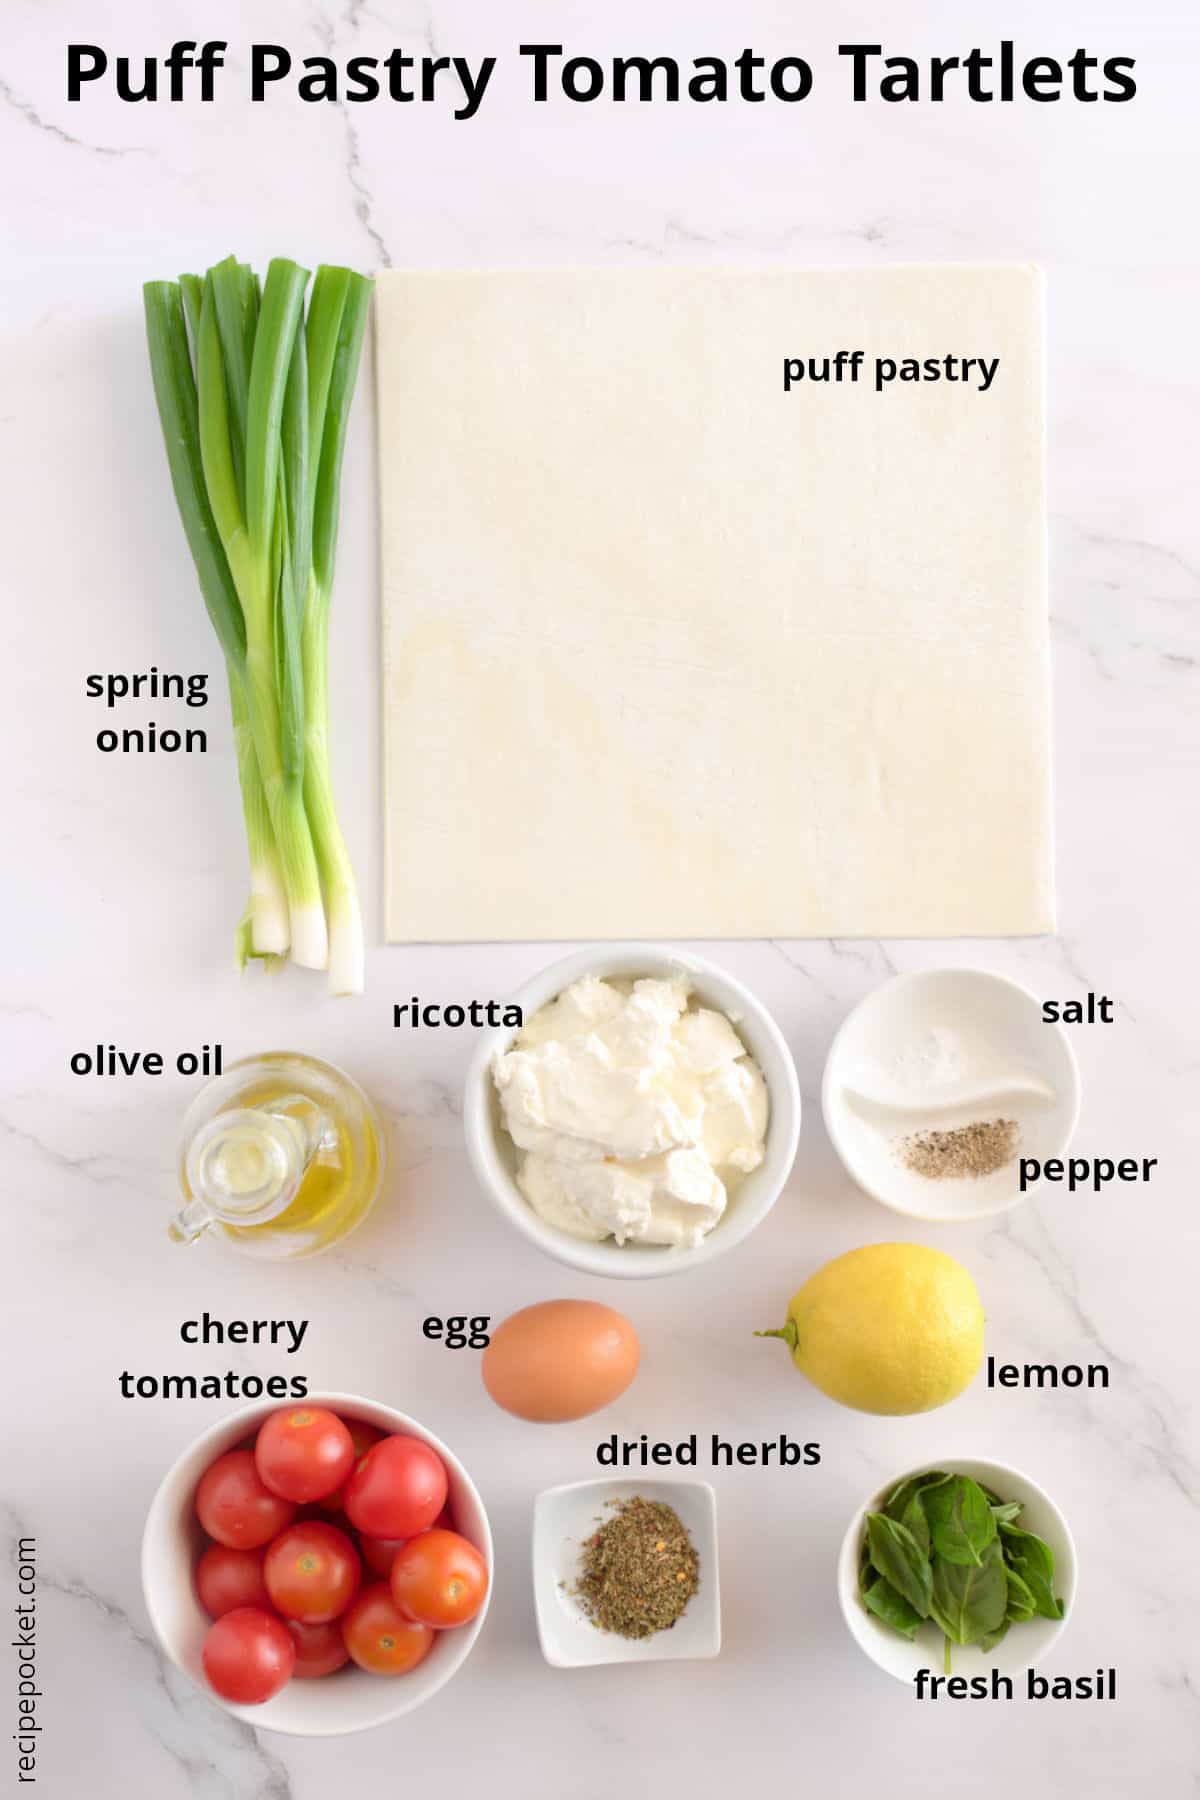 Image of ingredients for puff pastry tartlets.